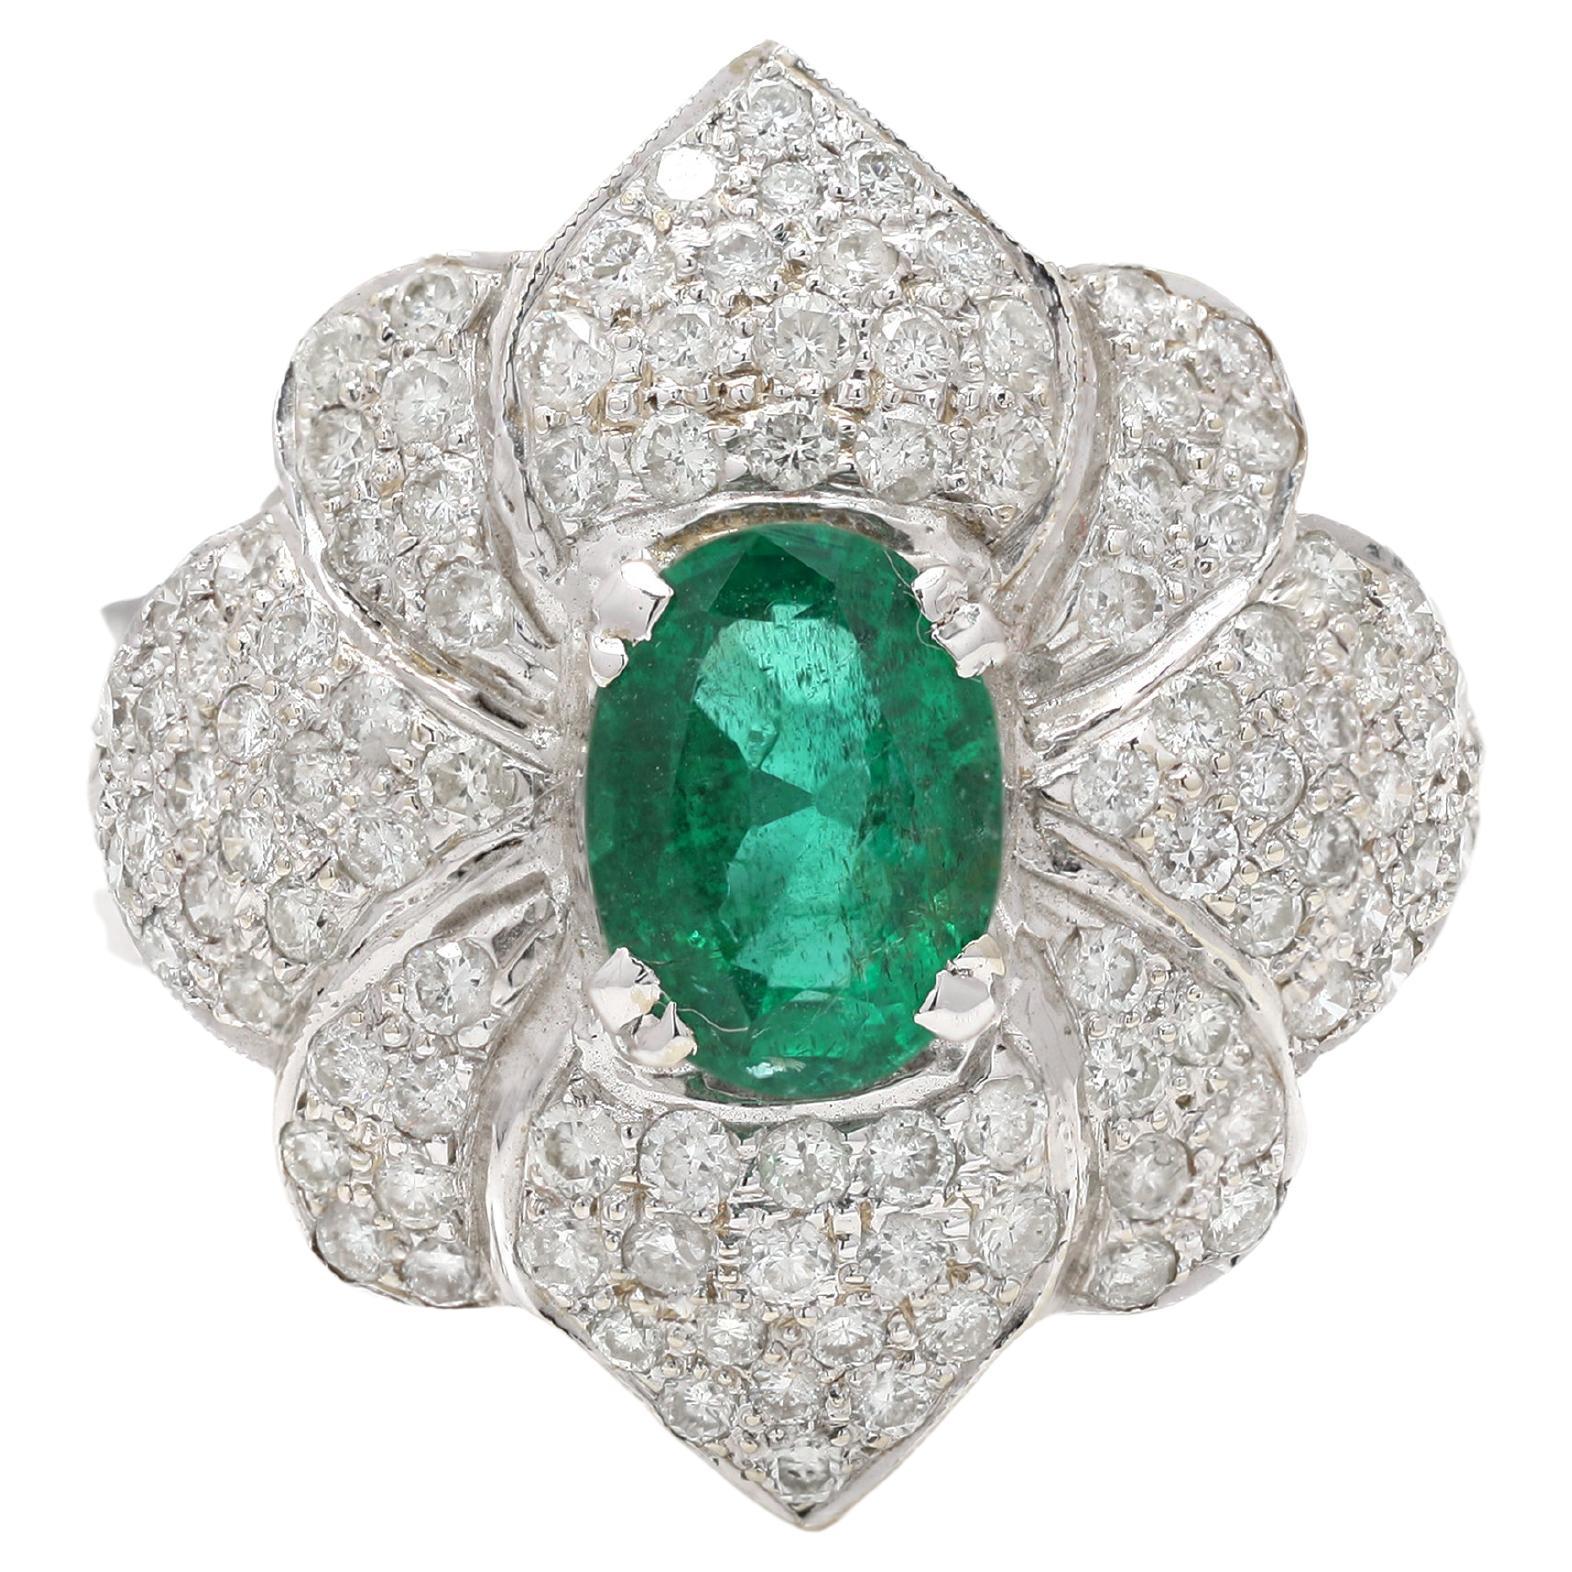 For Sale:  Designer Diamond and Emerald Floral Statement Ring in Solid 18k White Gold